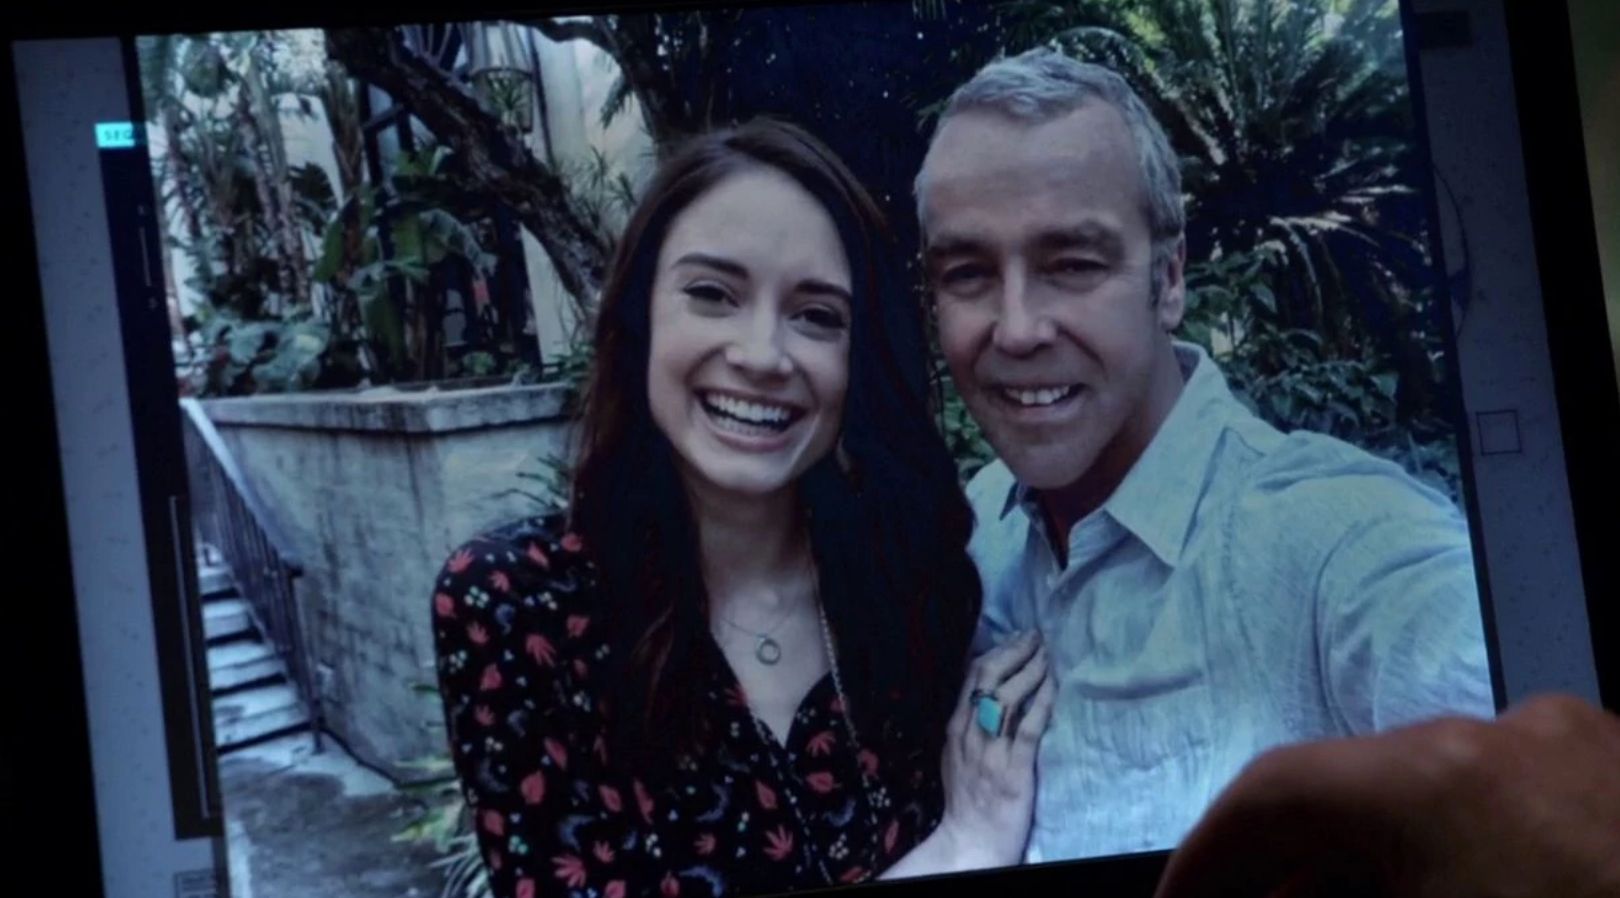 Agnes And Radcliffe Photograph In Agents Of SHIELD S4E13 BOOM